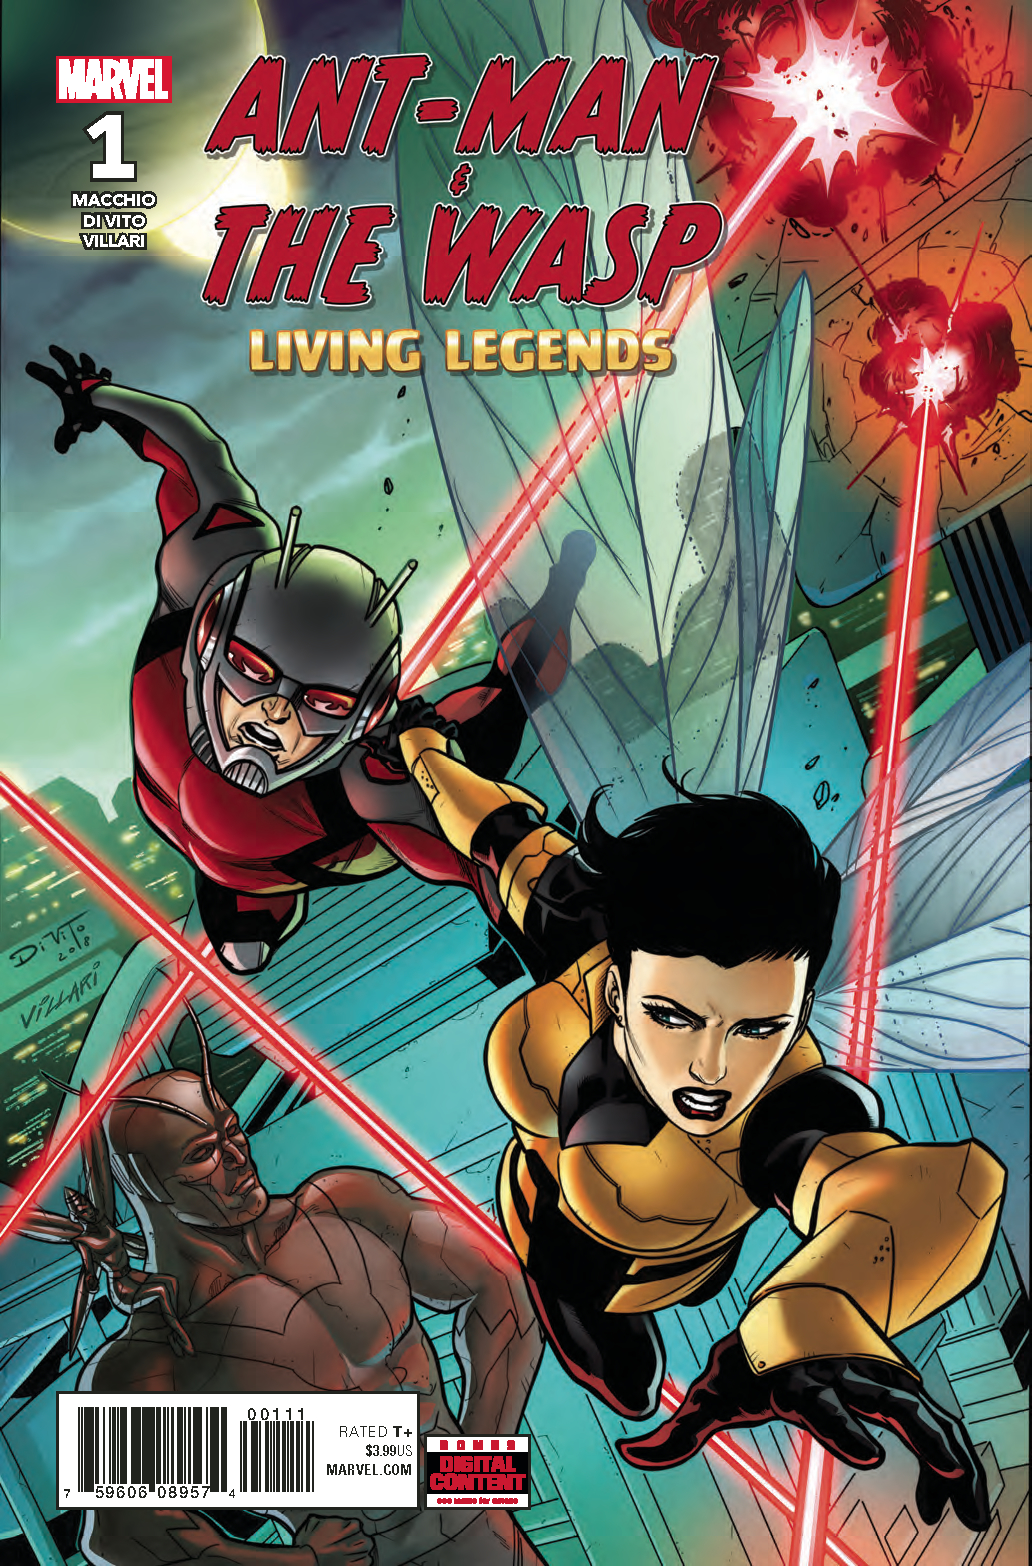 ANT-MAN AND WASP LIVING LEGENDS #1